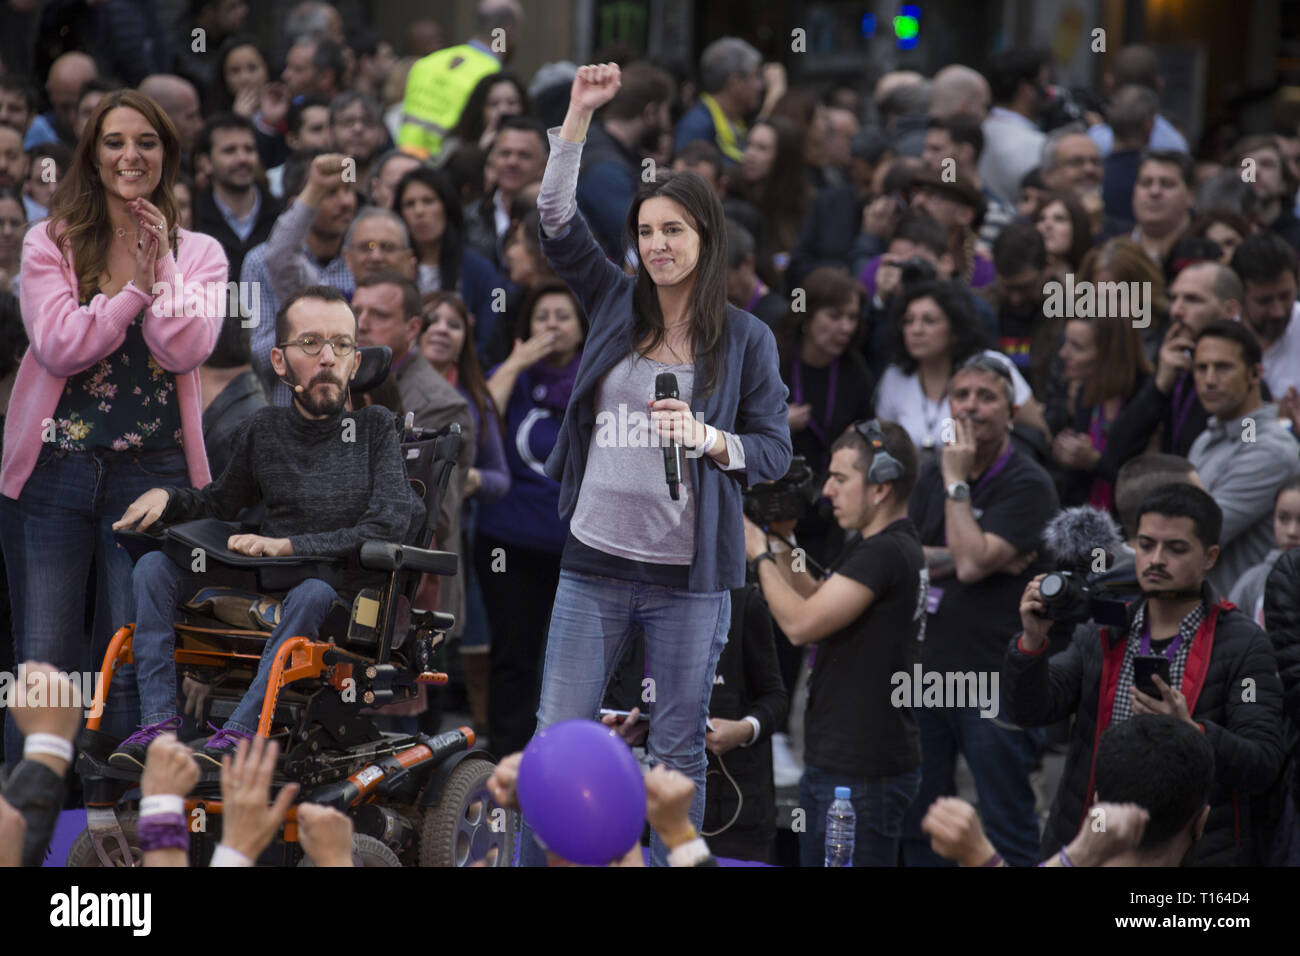 Madrid, Spain. 23rd Mar, 2019. Irene Montero seen raising her fist at the end of her speech during the rally.Hundreds of people gathered at the rally of Podemos ''He returns'' (Vuelve in Spanish) as an act of pre-election campaign after the return of the party leader, Pablo Iglesias. During the rally, different members of the Unidos Podemos group participated. Credit: Lito Lizana/SOPA Images/ZUMA Wire/Alamy Live News Stock Photo